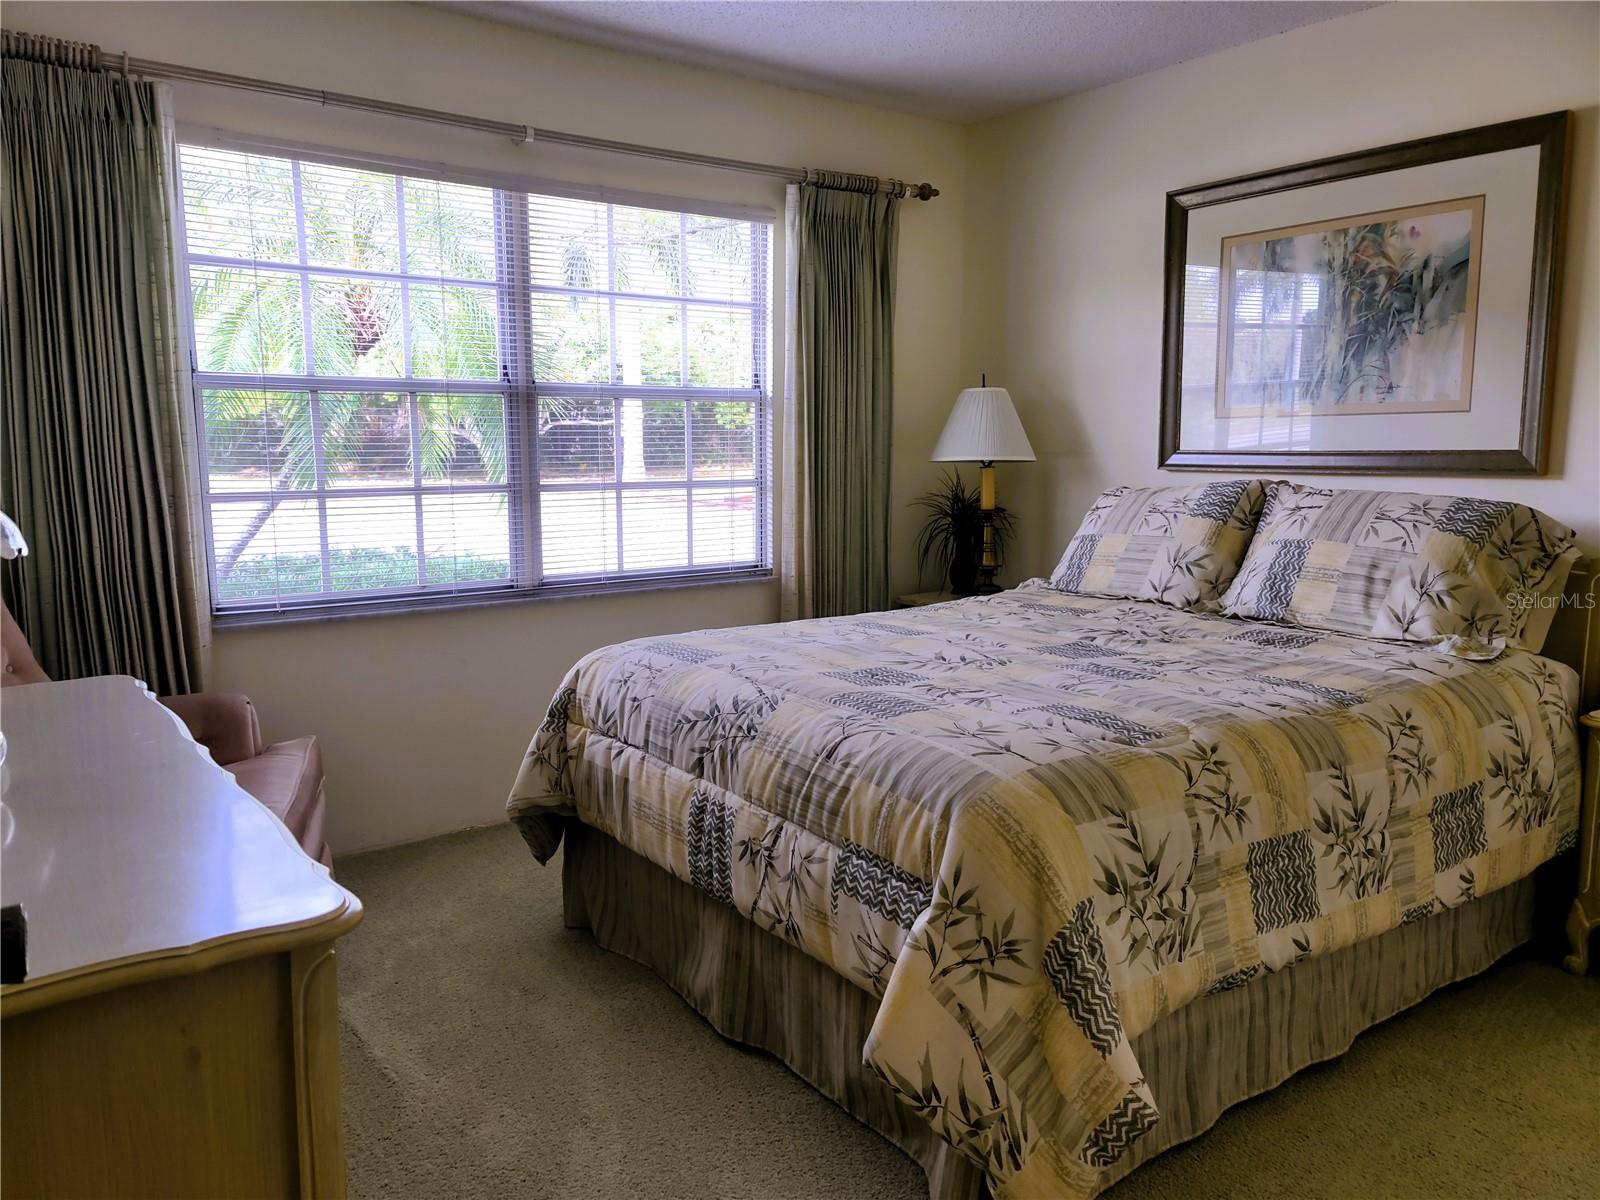 Bright cheerful guest bedroom spacious enough for queen size bed.